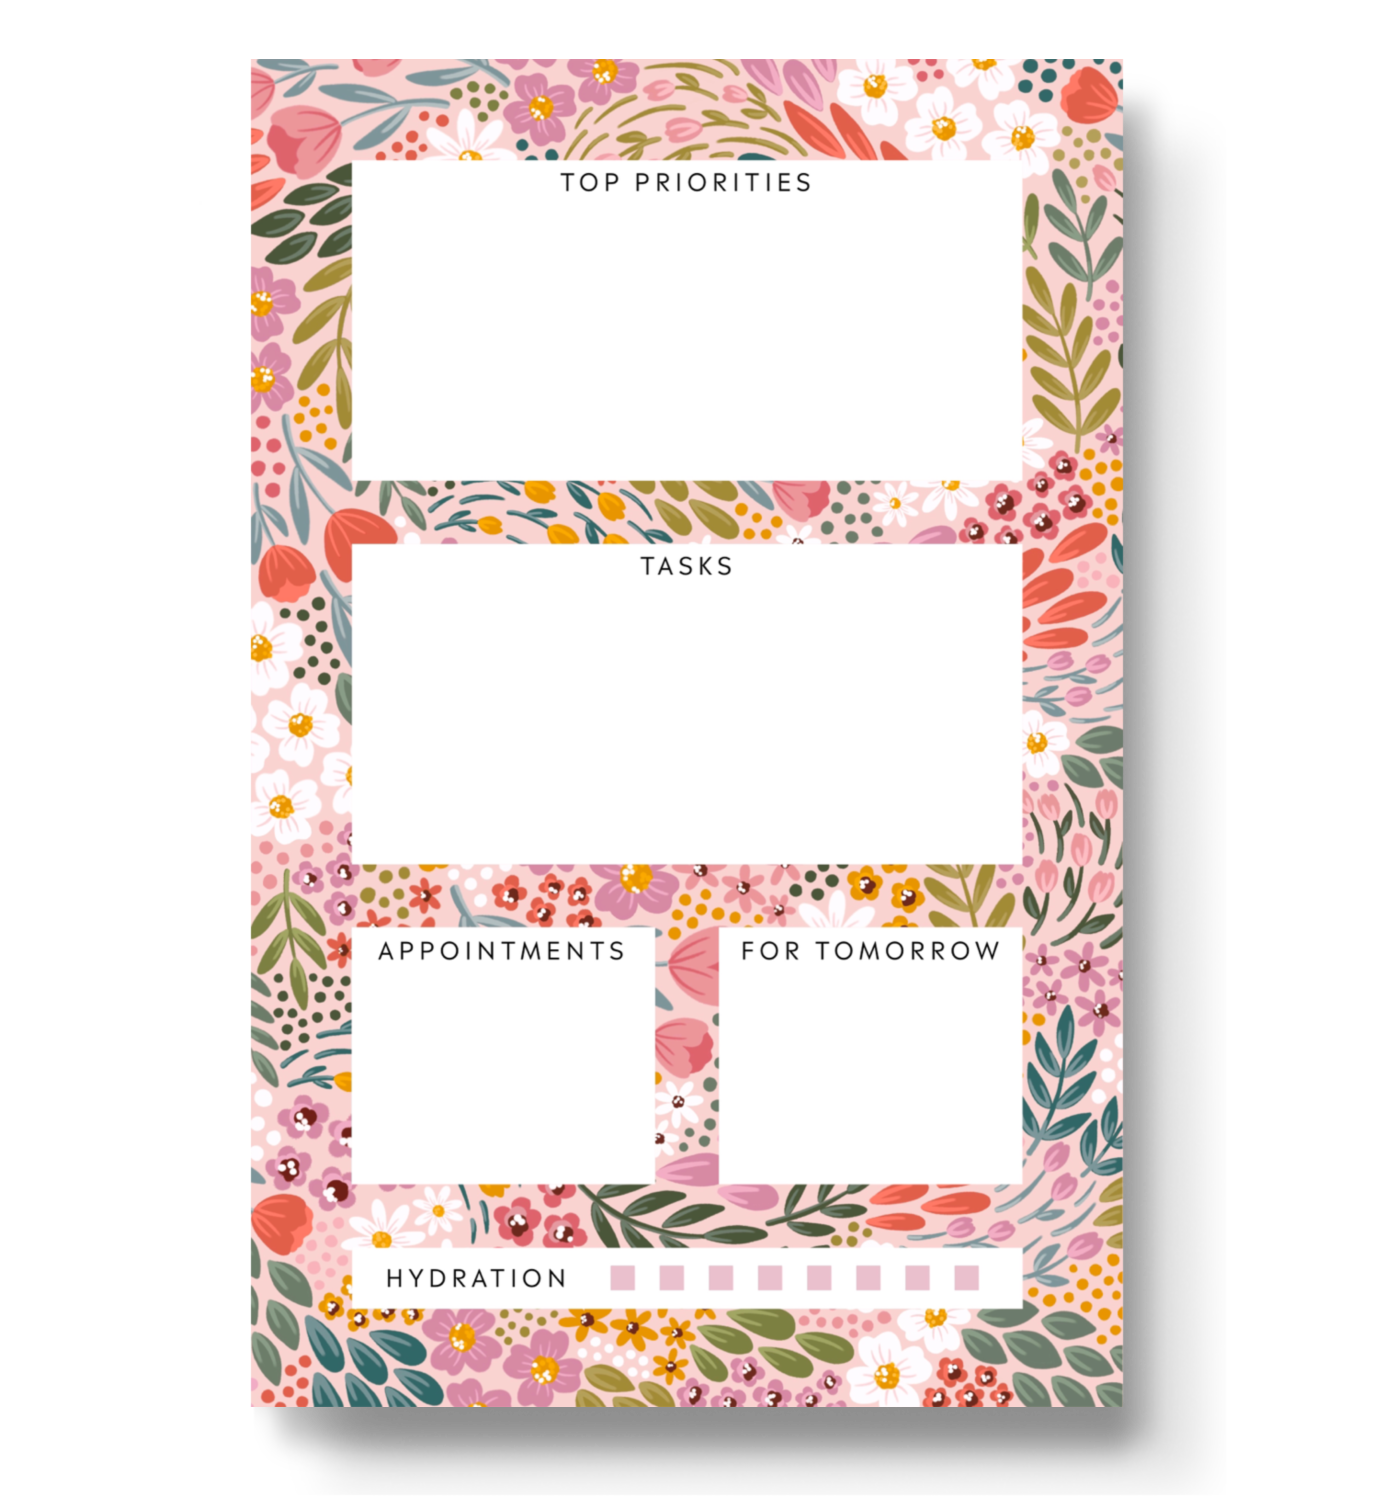 Summer Meadows Daily Planner Notepad, 8.5x5.5 in.